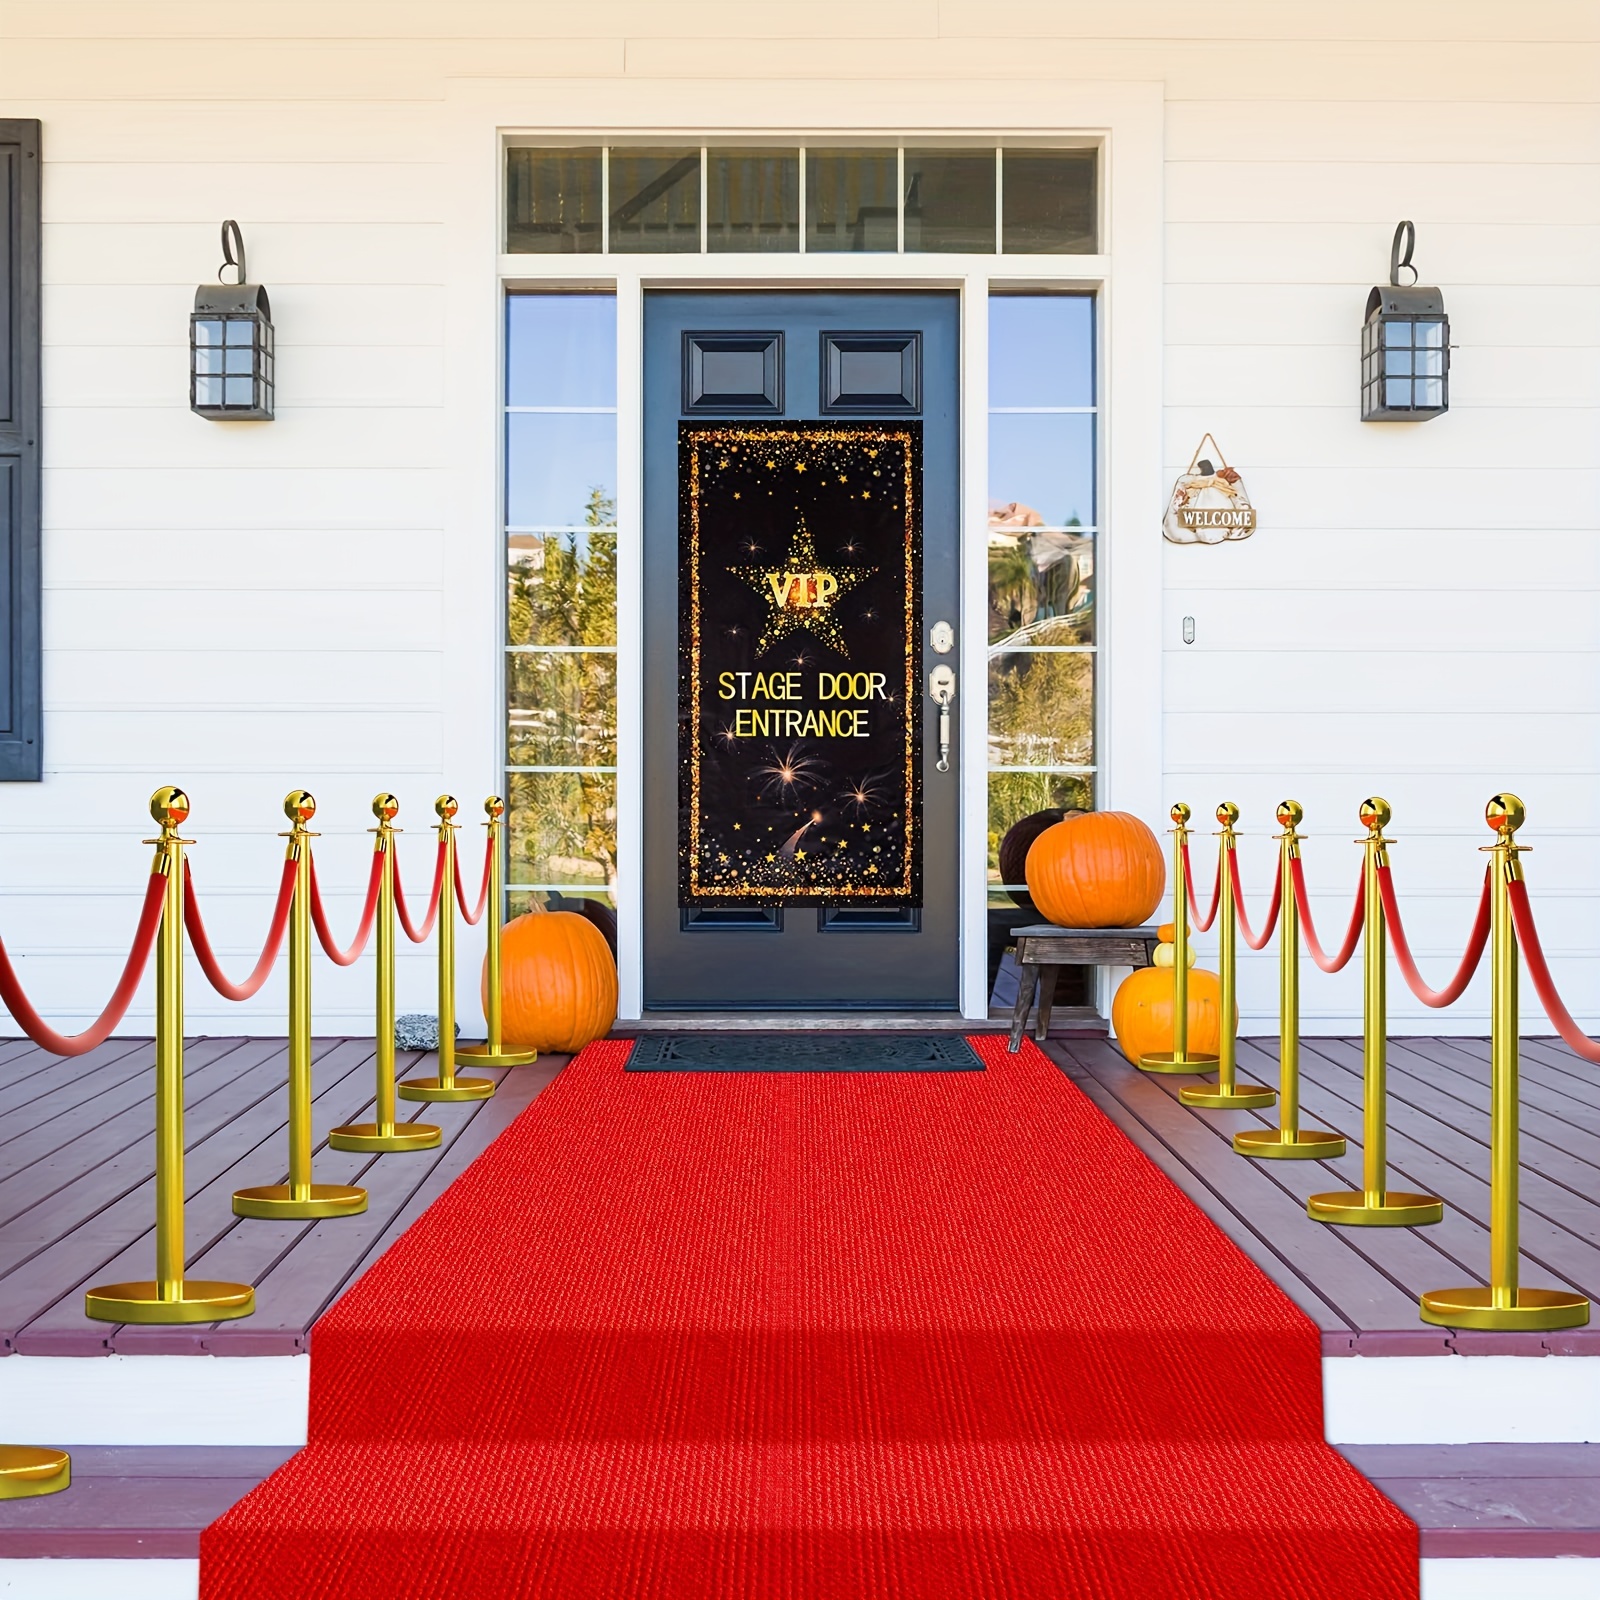 

Versatile 62.99" Wide Red Carpet For Weddings, Holidays & Special Events - Durable Polyester, Perfect For Parties, Hotels & Aisles